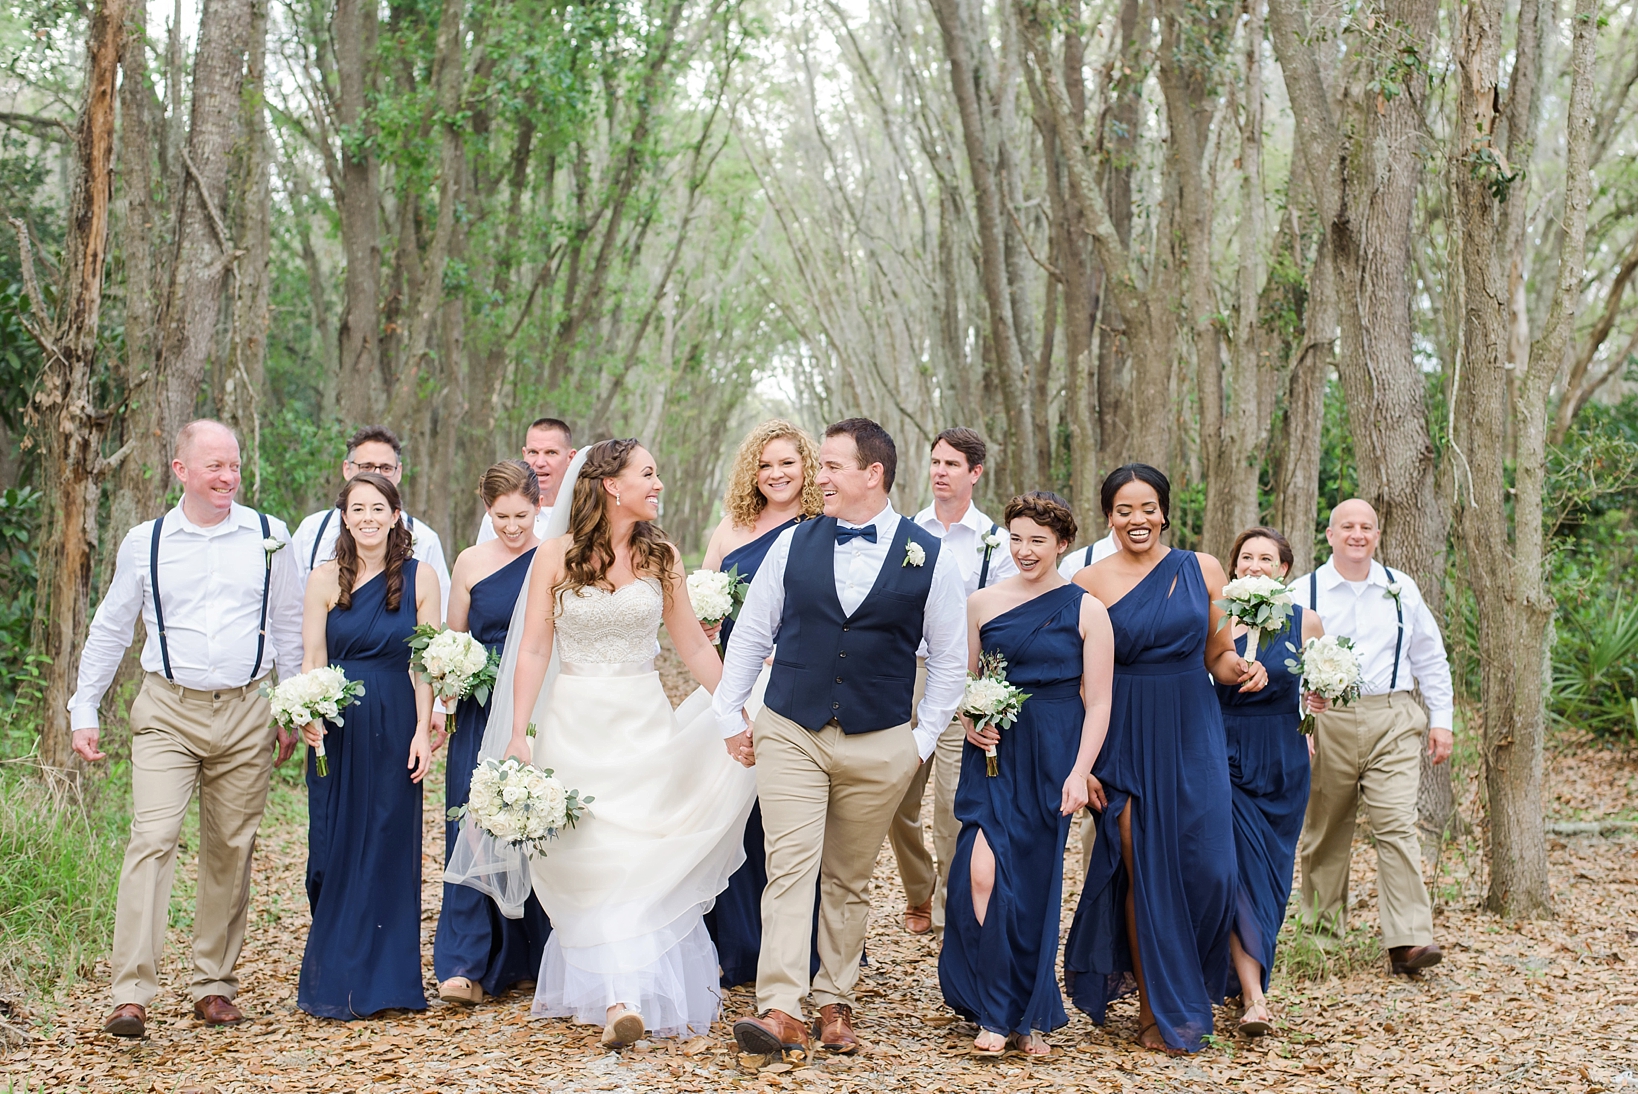 The wedding Bridal Party walking through the woods towards the ceremony by Sarah & Ben Photography